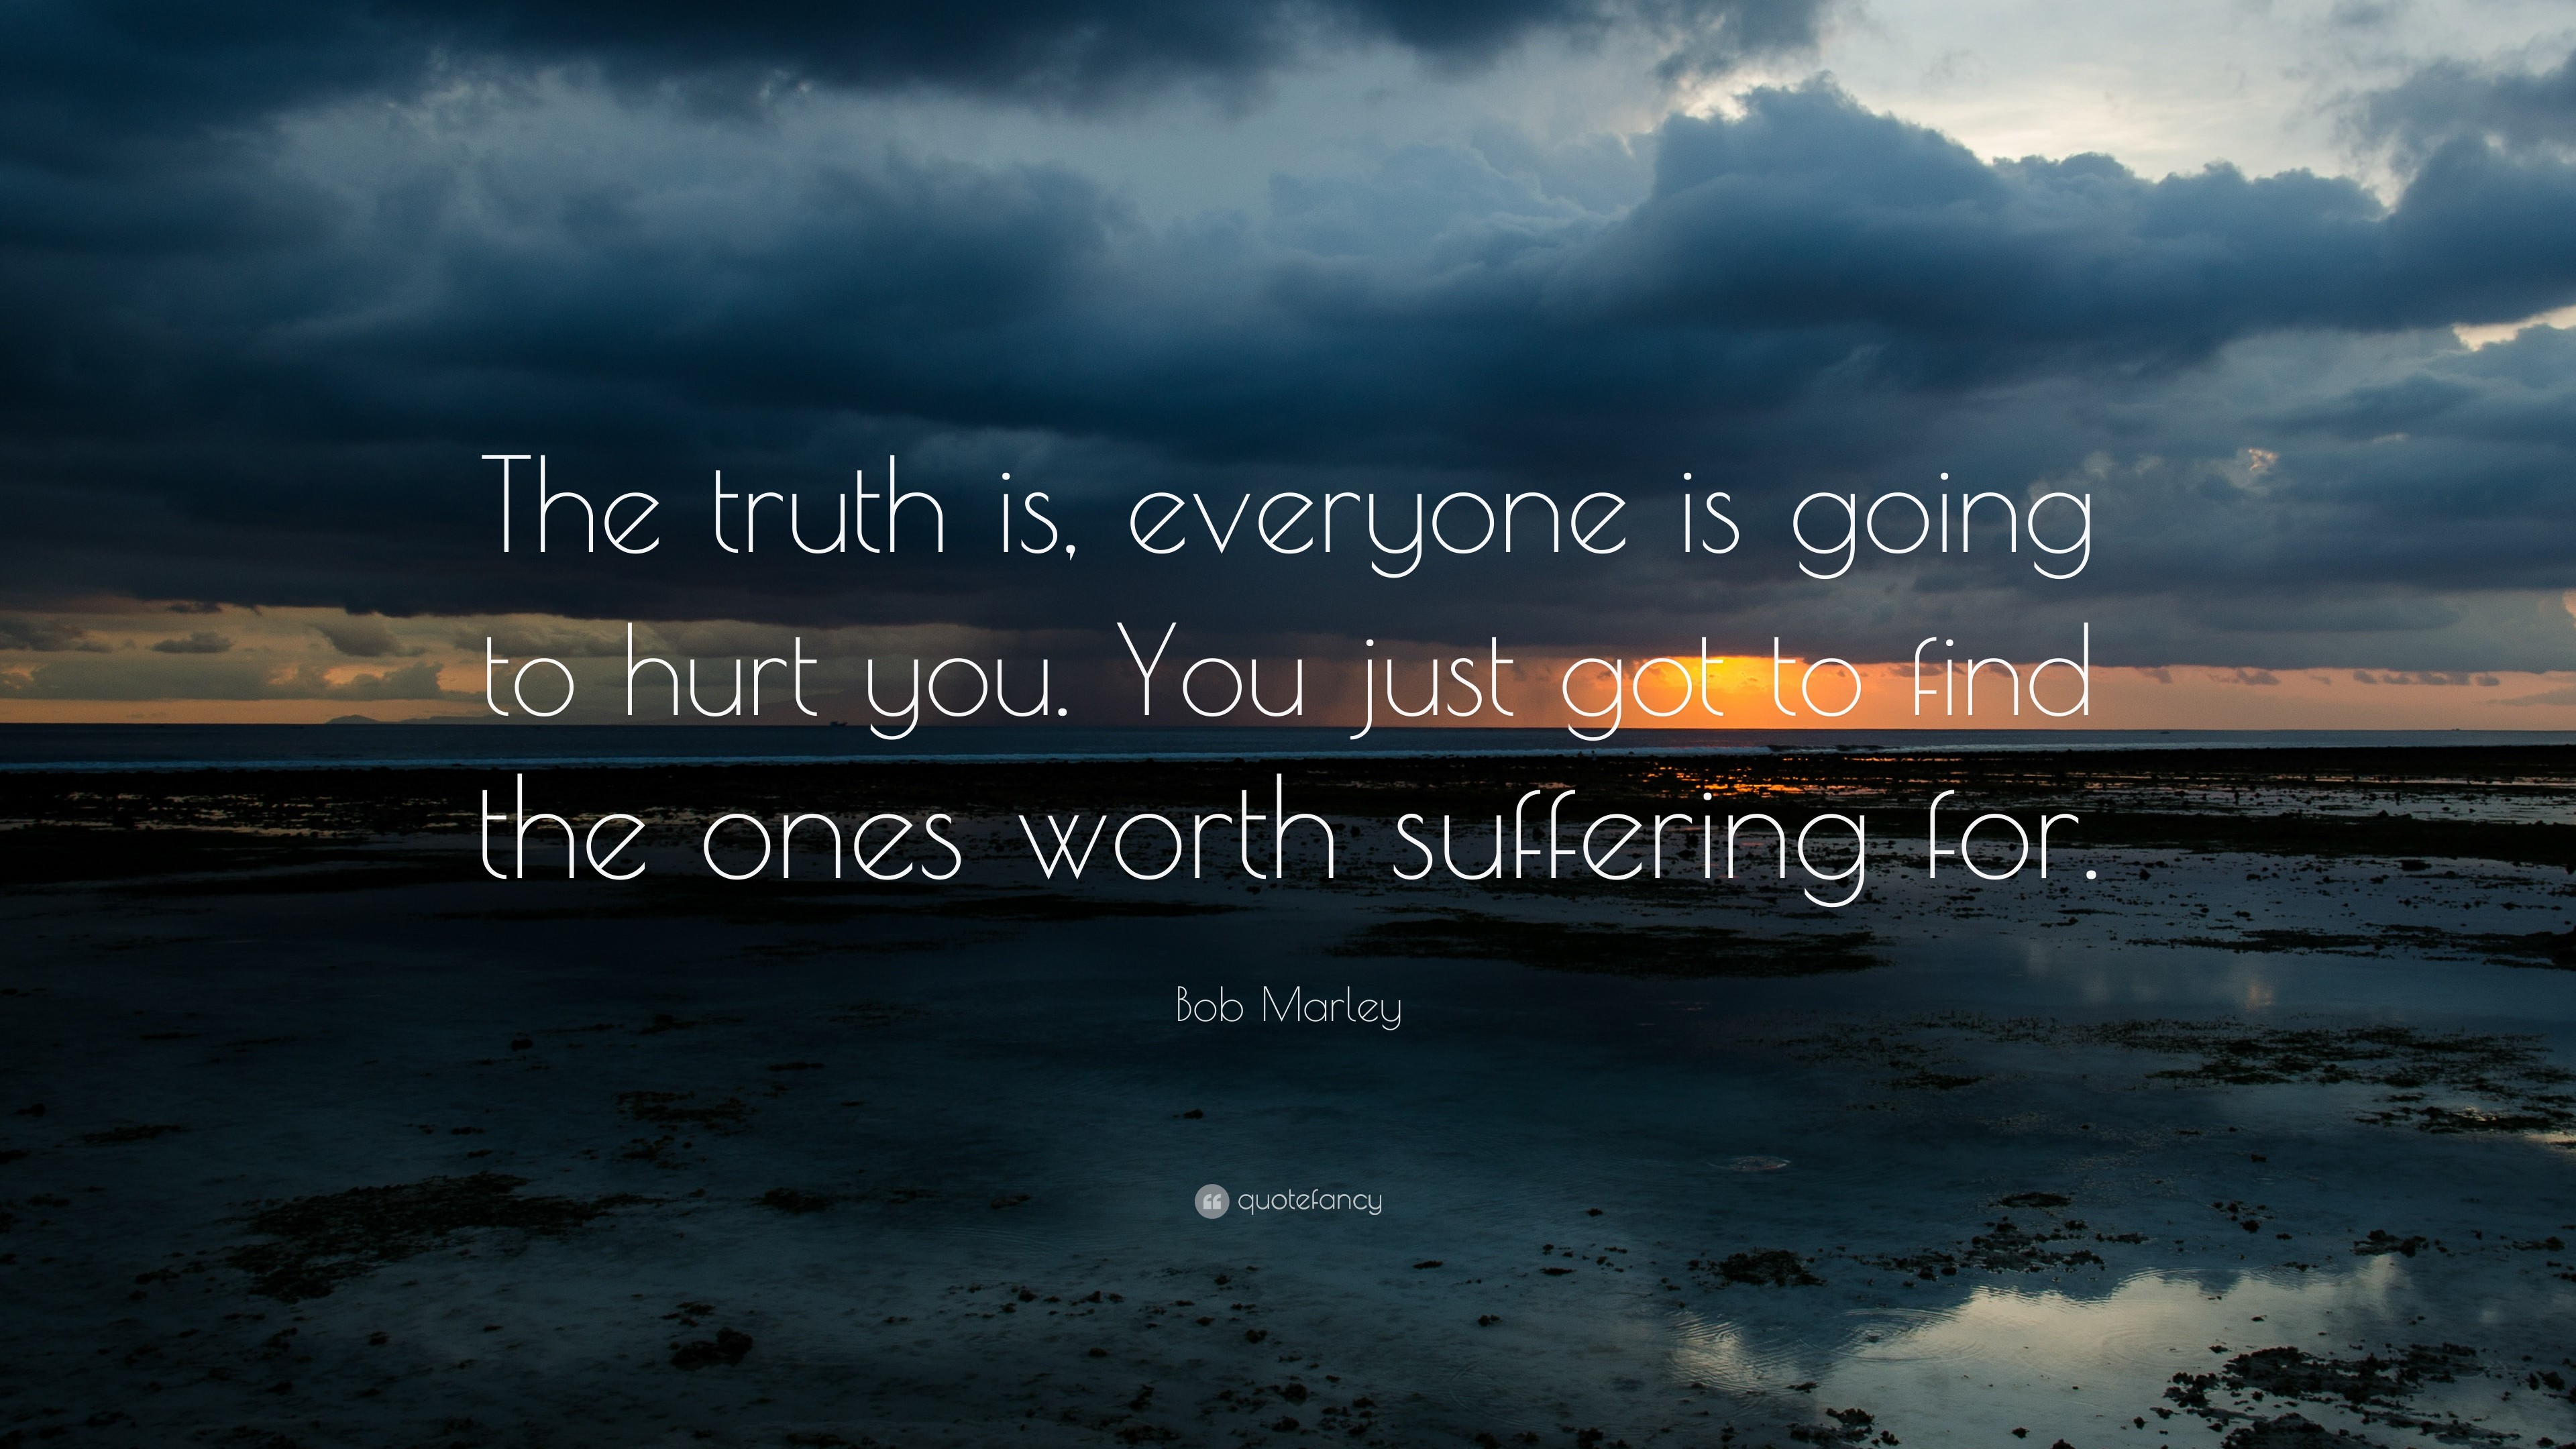 3840x2160 Bob Marley Quote: “The truth is, everyone is going to hurt you.